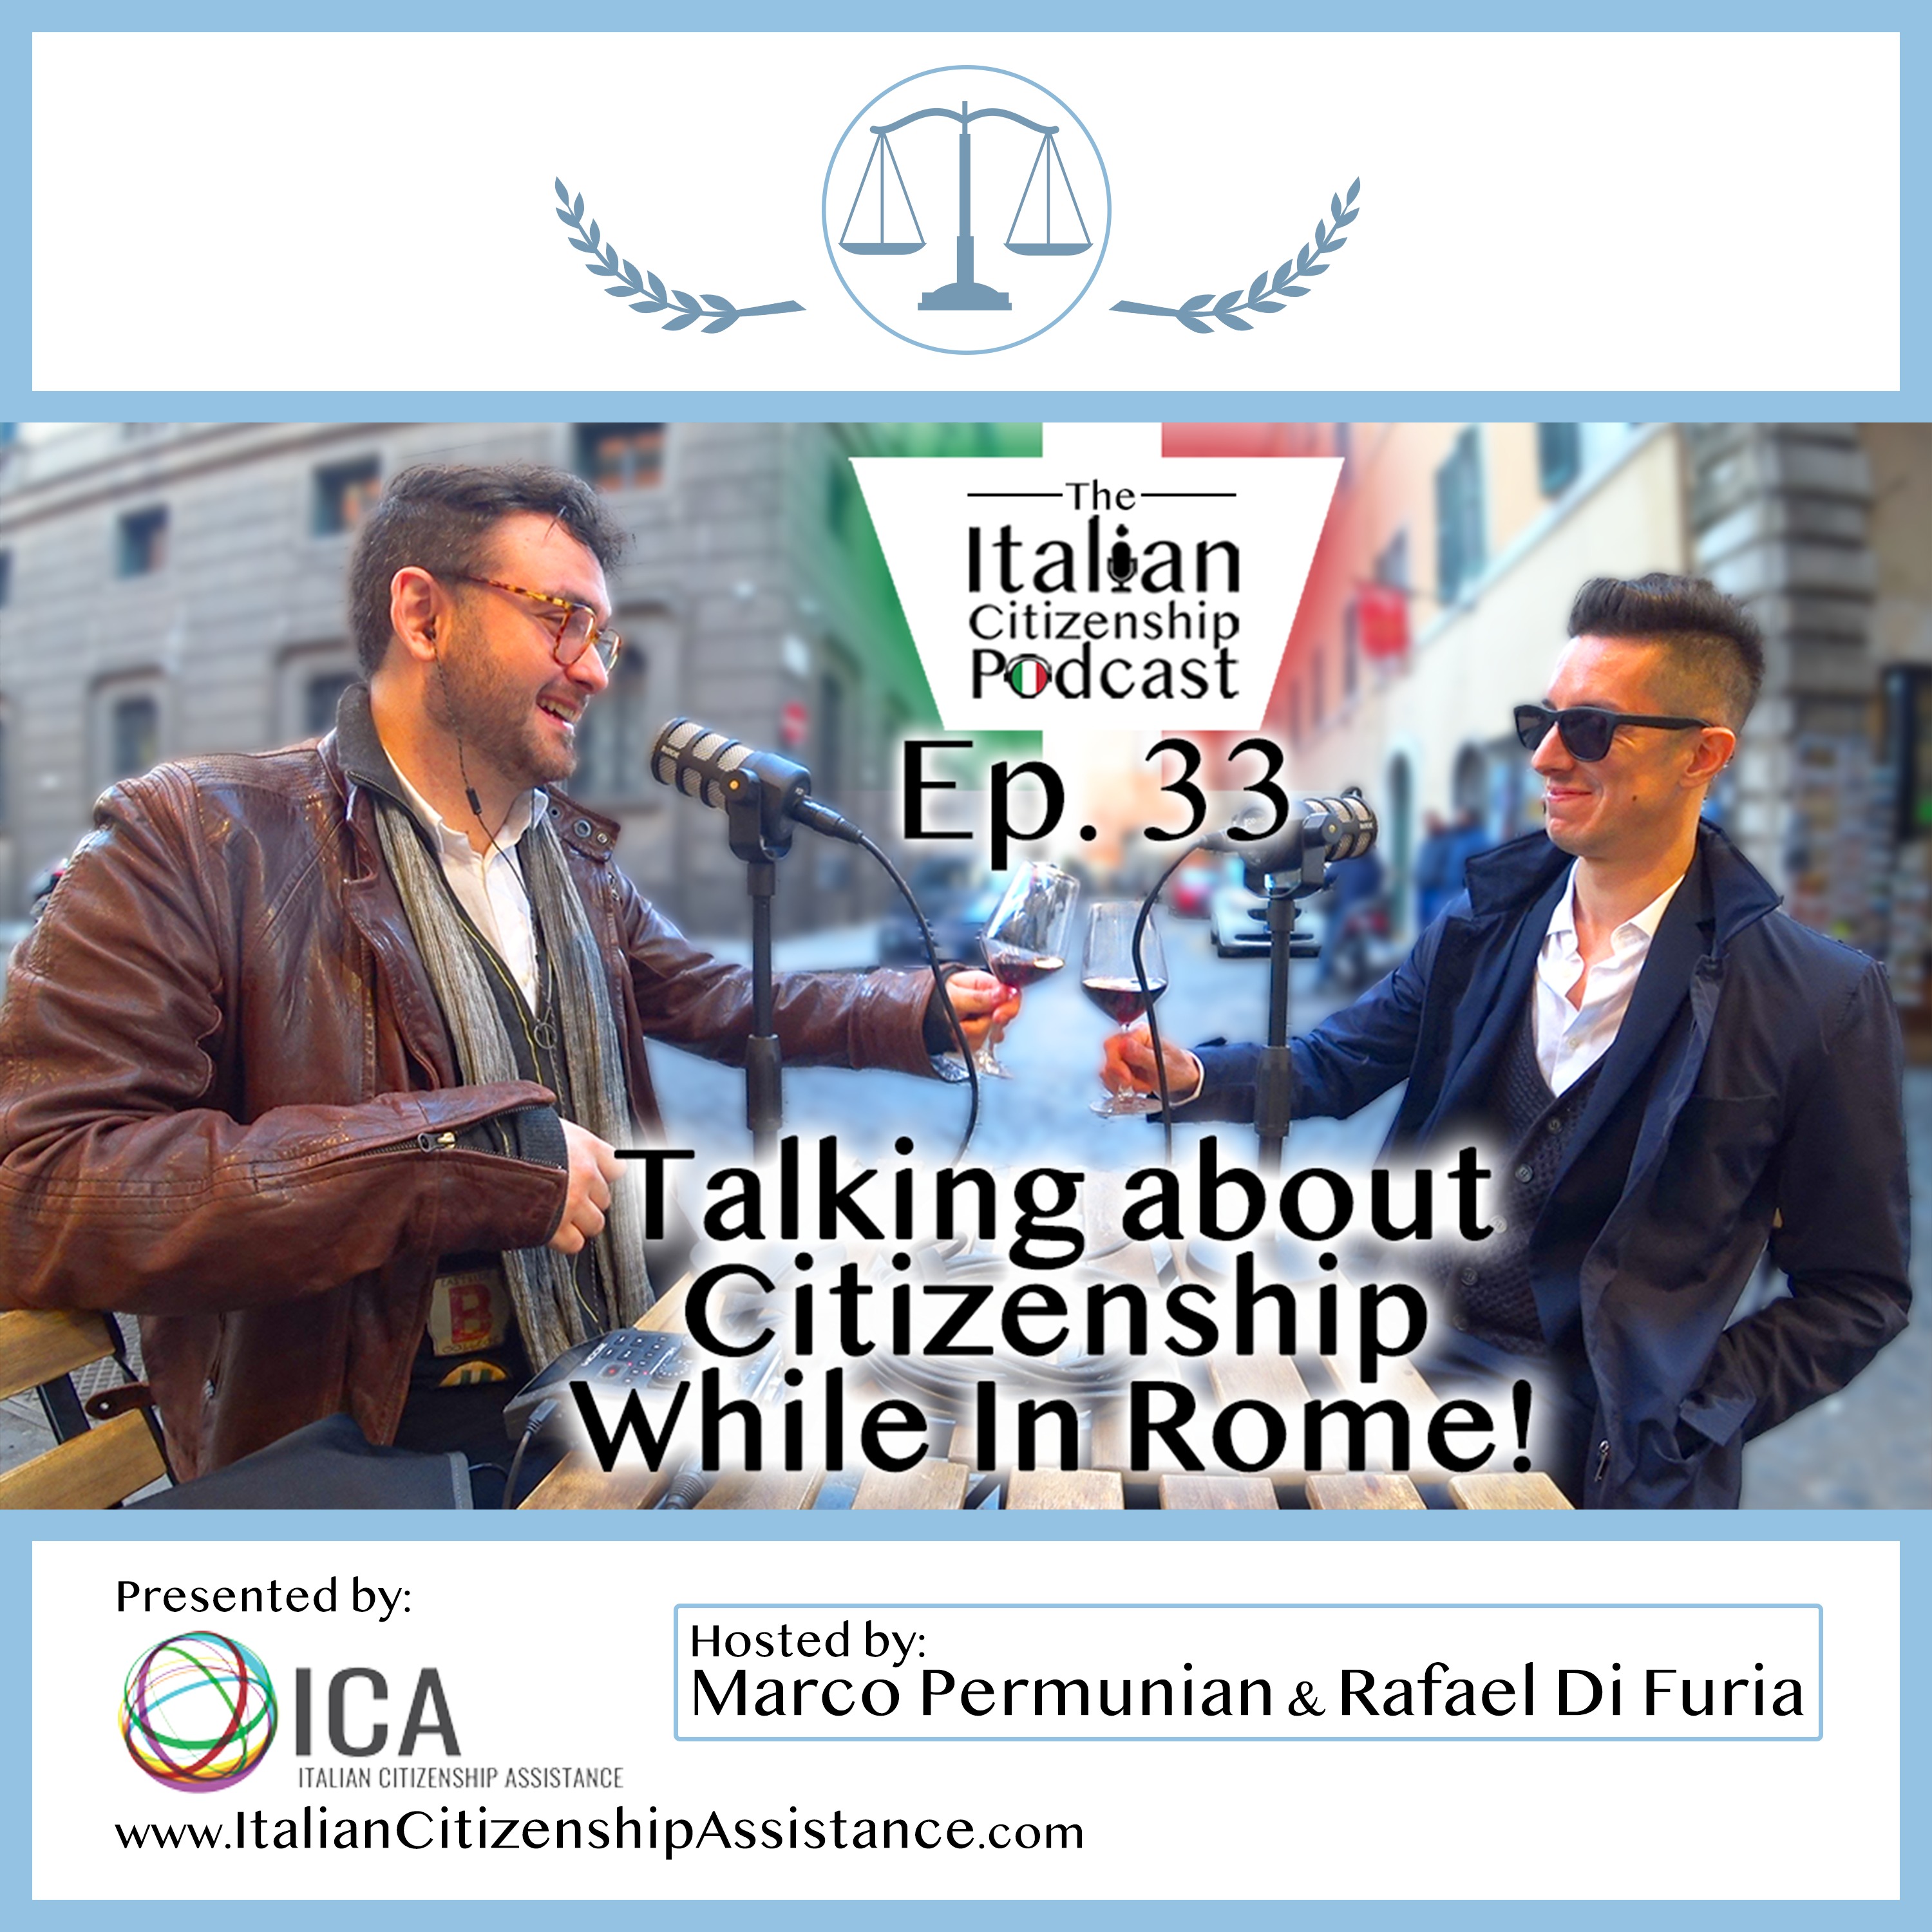 Talking about Italian Citizenship in Rome, Italy (Moving To Italy + Jure Sanguinis & More)